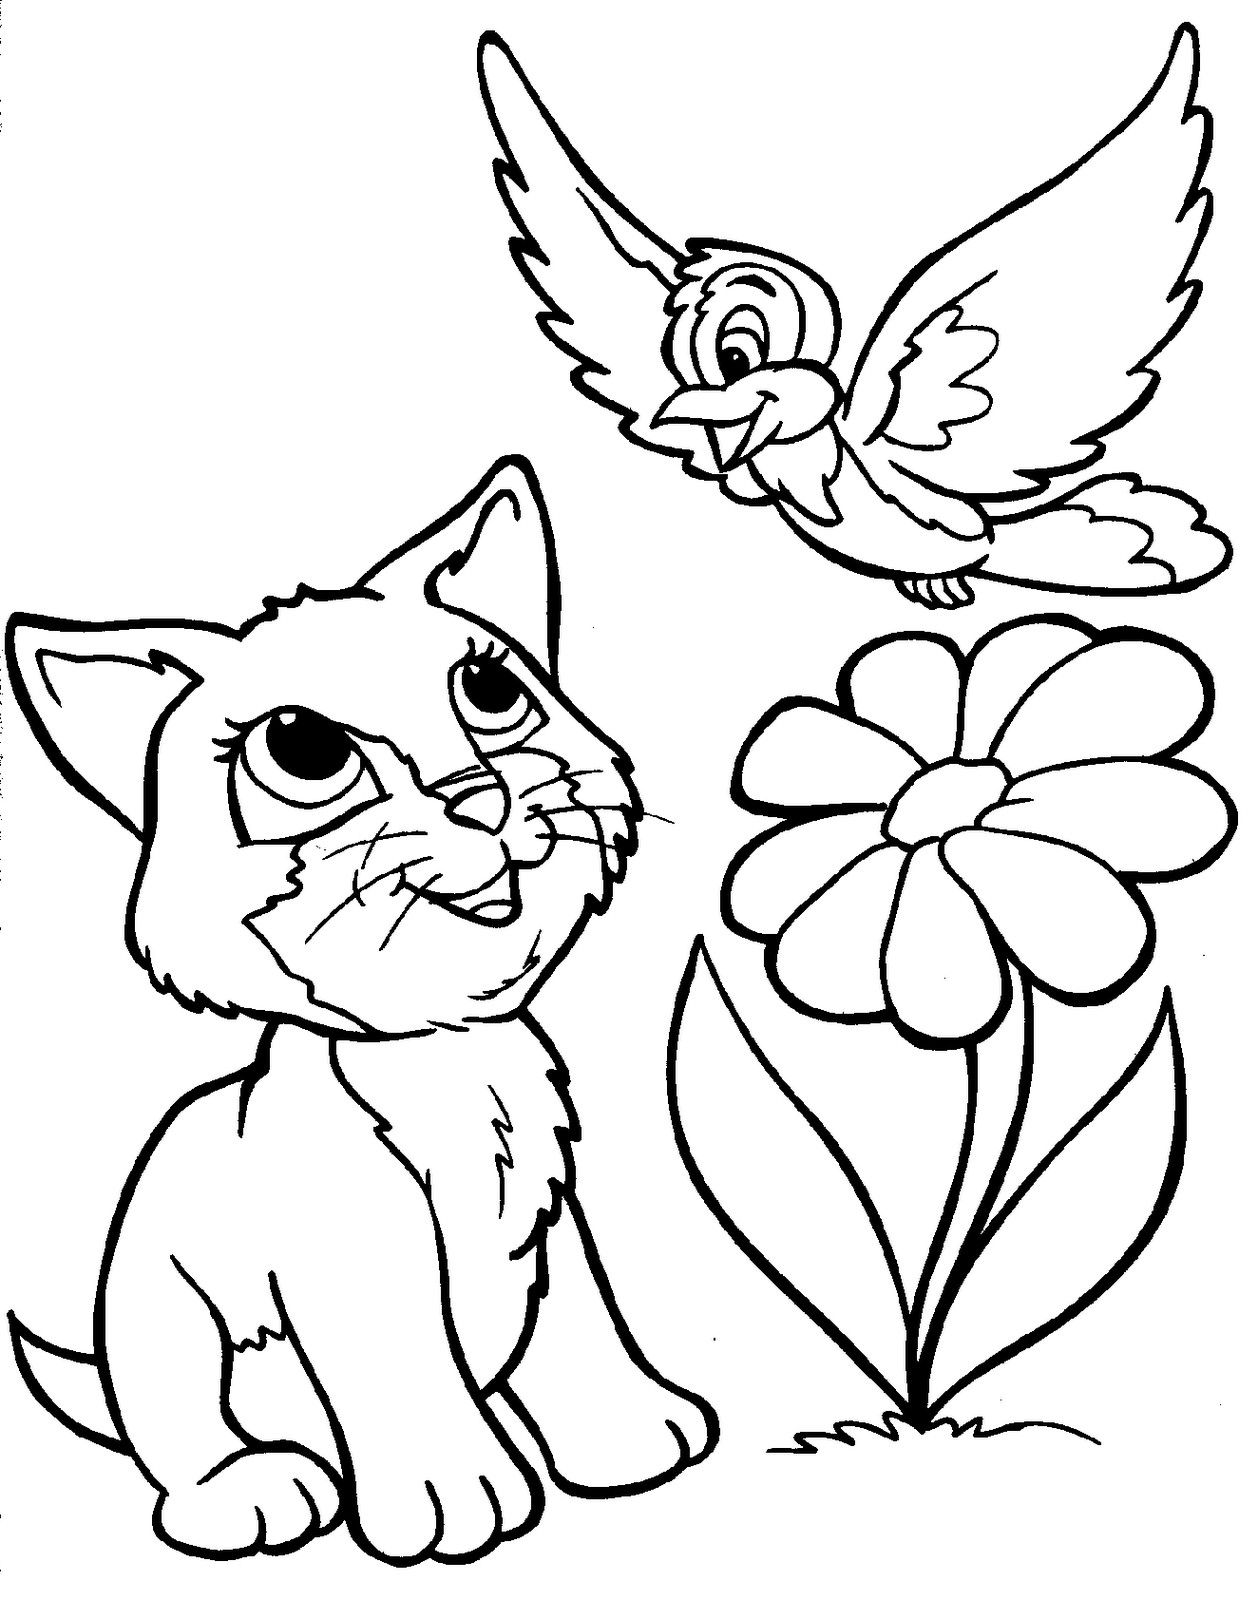 Printable Animal Coloring Pages For Kids
 10 Cute Animals Coloring Pages